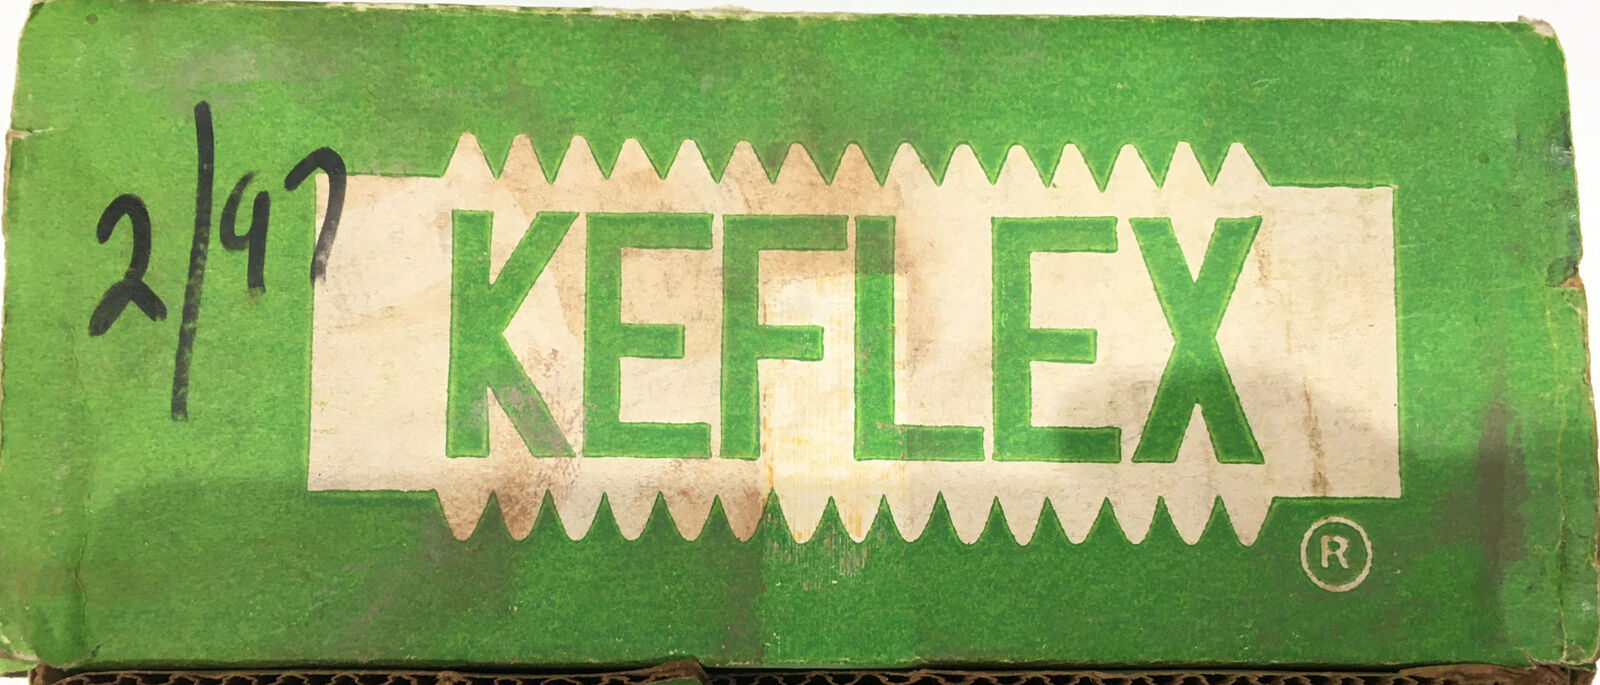 NEW - KEFLEX 20 7Q Compensator 2 NPT 300PSI Max Pipe Fitting Expansion Joint